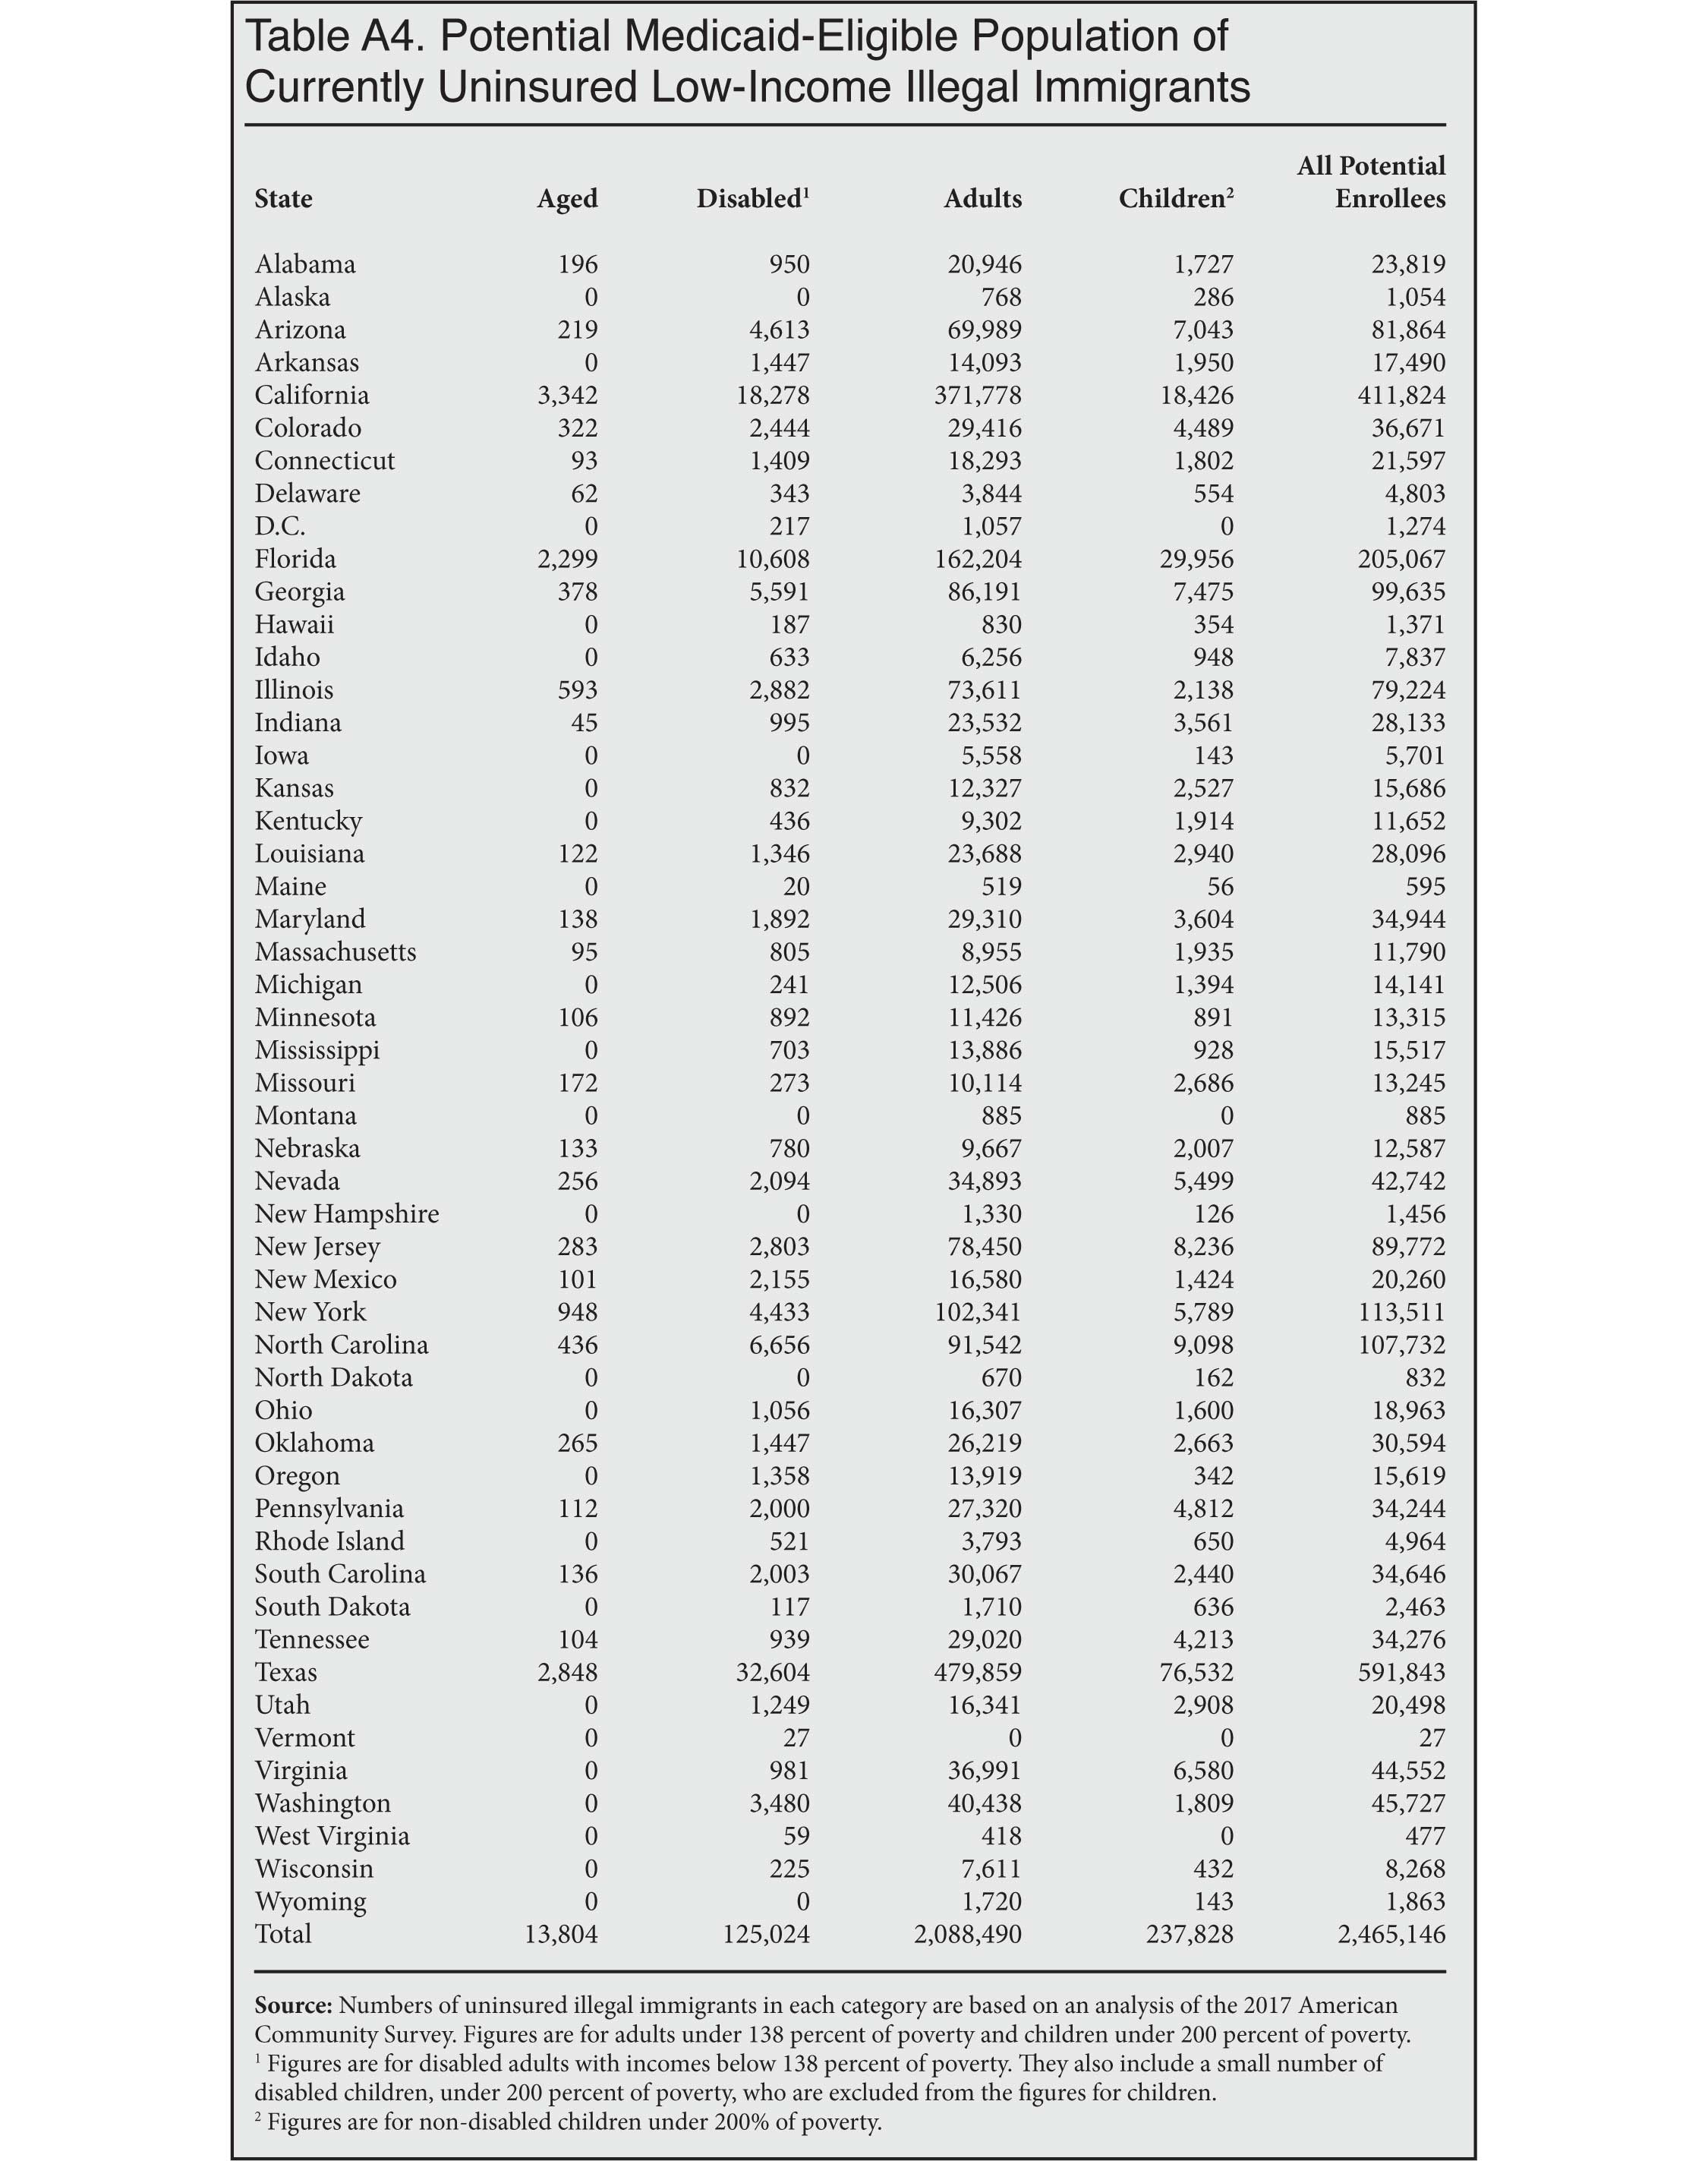 Table: Potential Medicaid Eligible Population of Currently Uninsured Low-income Illegal Immigrants